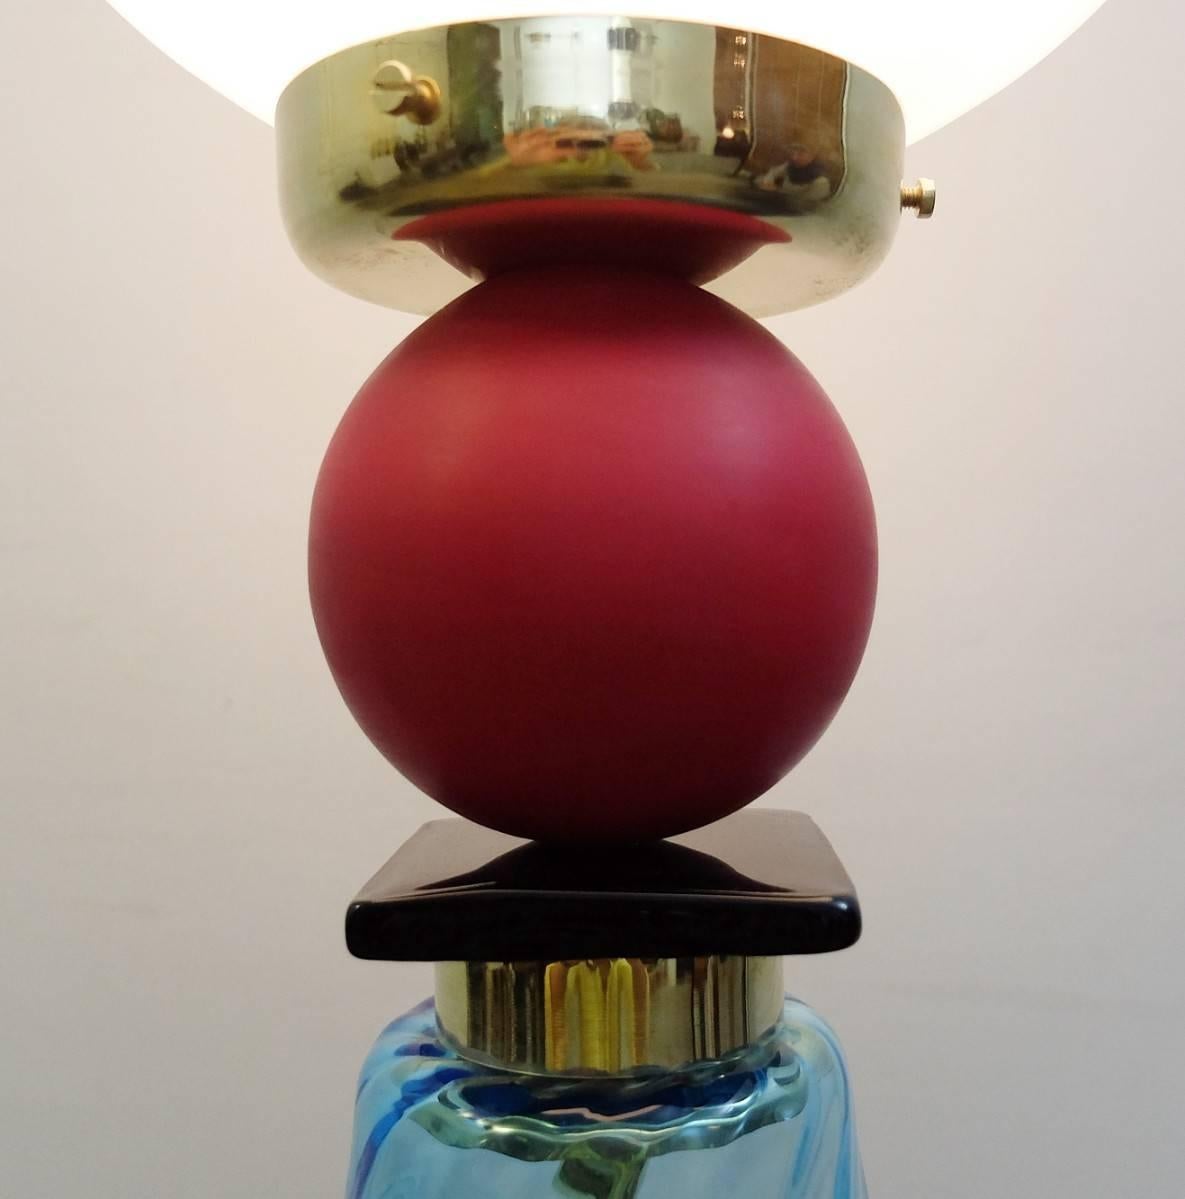 Contemporary Italian table lamp in Murano glass.
Mixture of brilliant and matte Murano glass.
Only one available. It is not a pair.